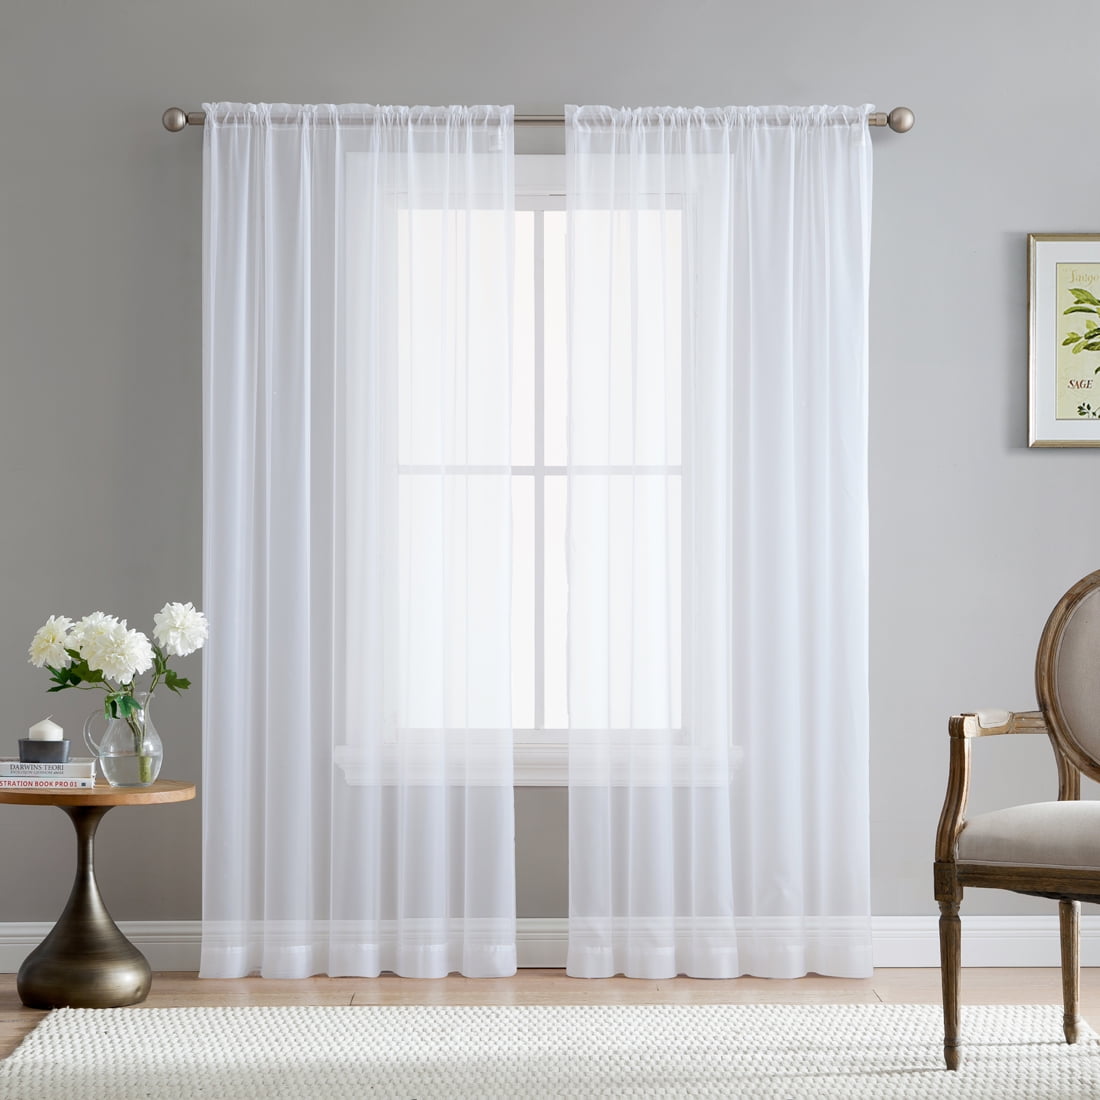 Bedroom HLC.ME Beige Sheer Voile Tab Top Window Treatment Cafe Tier Curtain Panels for Kitchen Small Windows and Bathroom 54 x 24 inch Long, Set of 2 